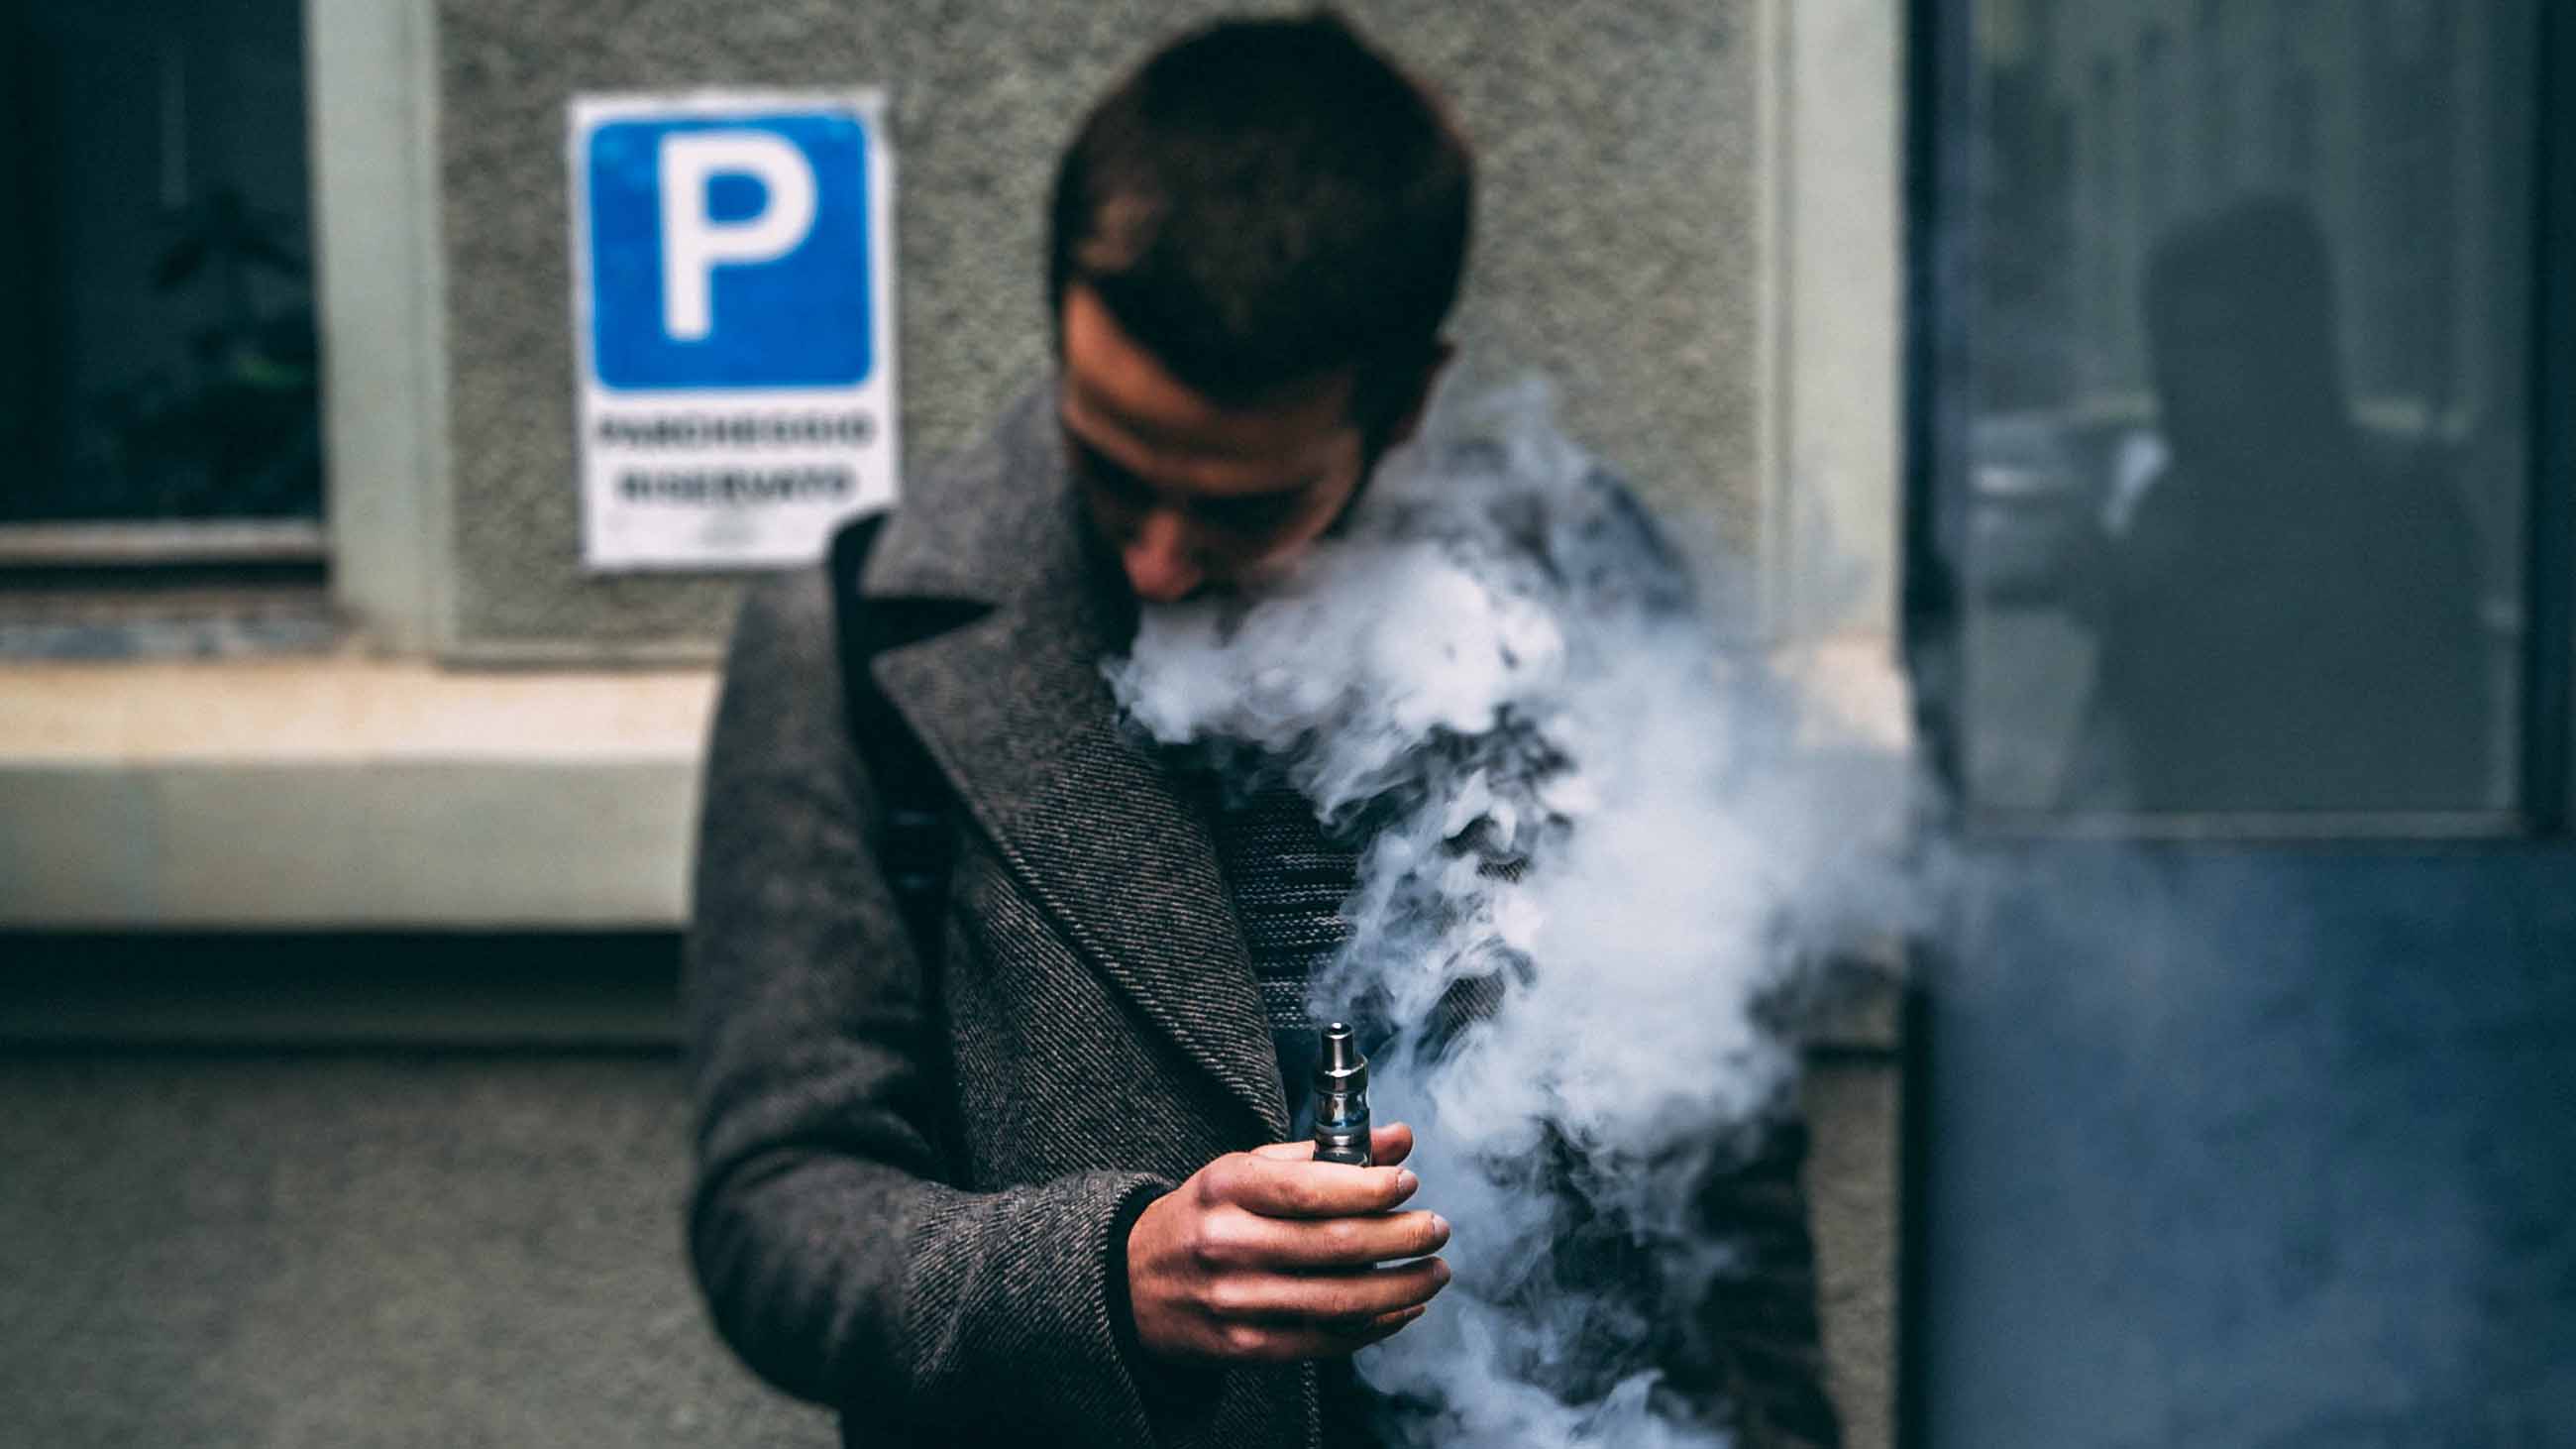 E-cigarettes are a fast evolving consumer product with ever-changing devices and chemicals, creating exposures to unknown health consequences.